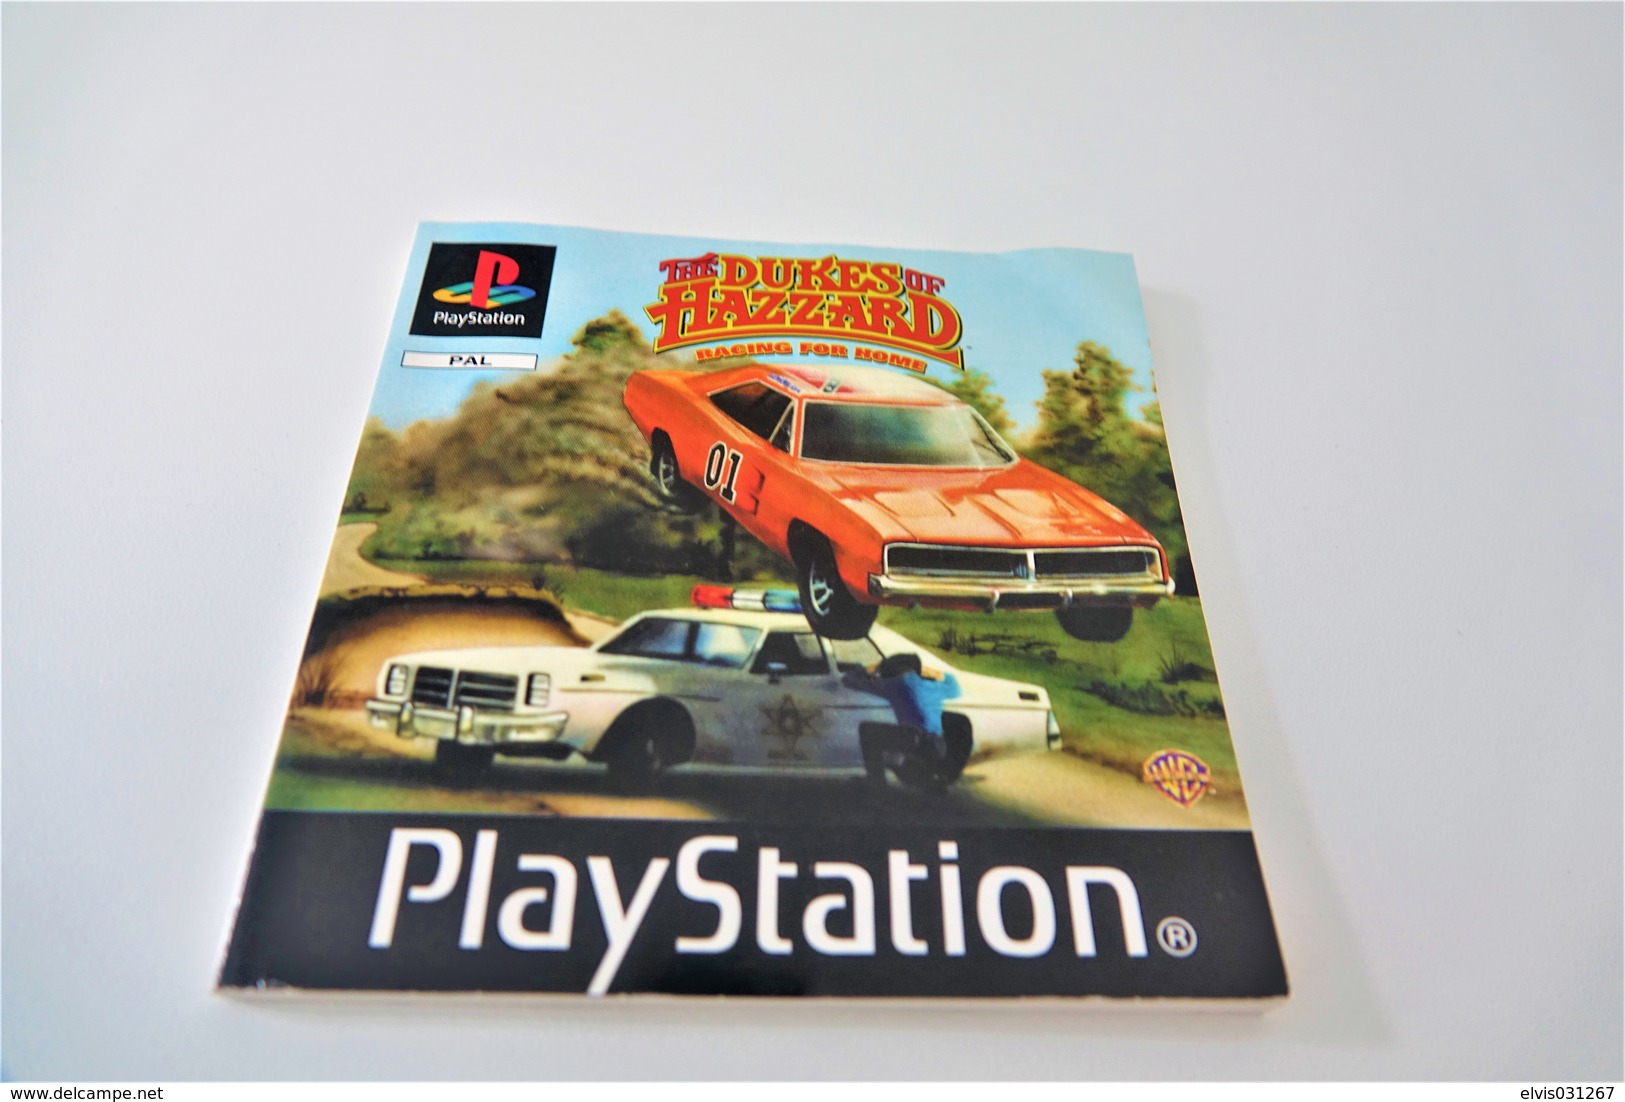 SONY PLAYSTATION ONE PS1 : UBISOFT EXCLUSIVE THE DUKES OF HAZZARD RACING FOR HOME - Playstation